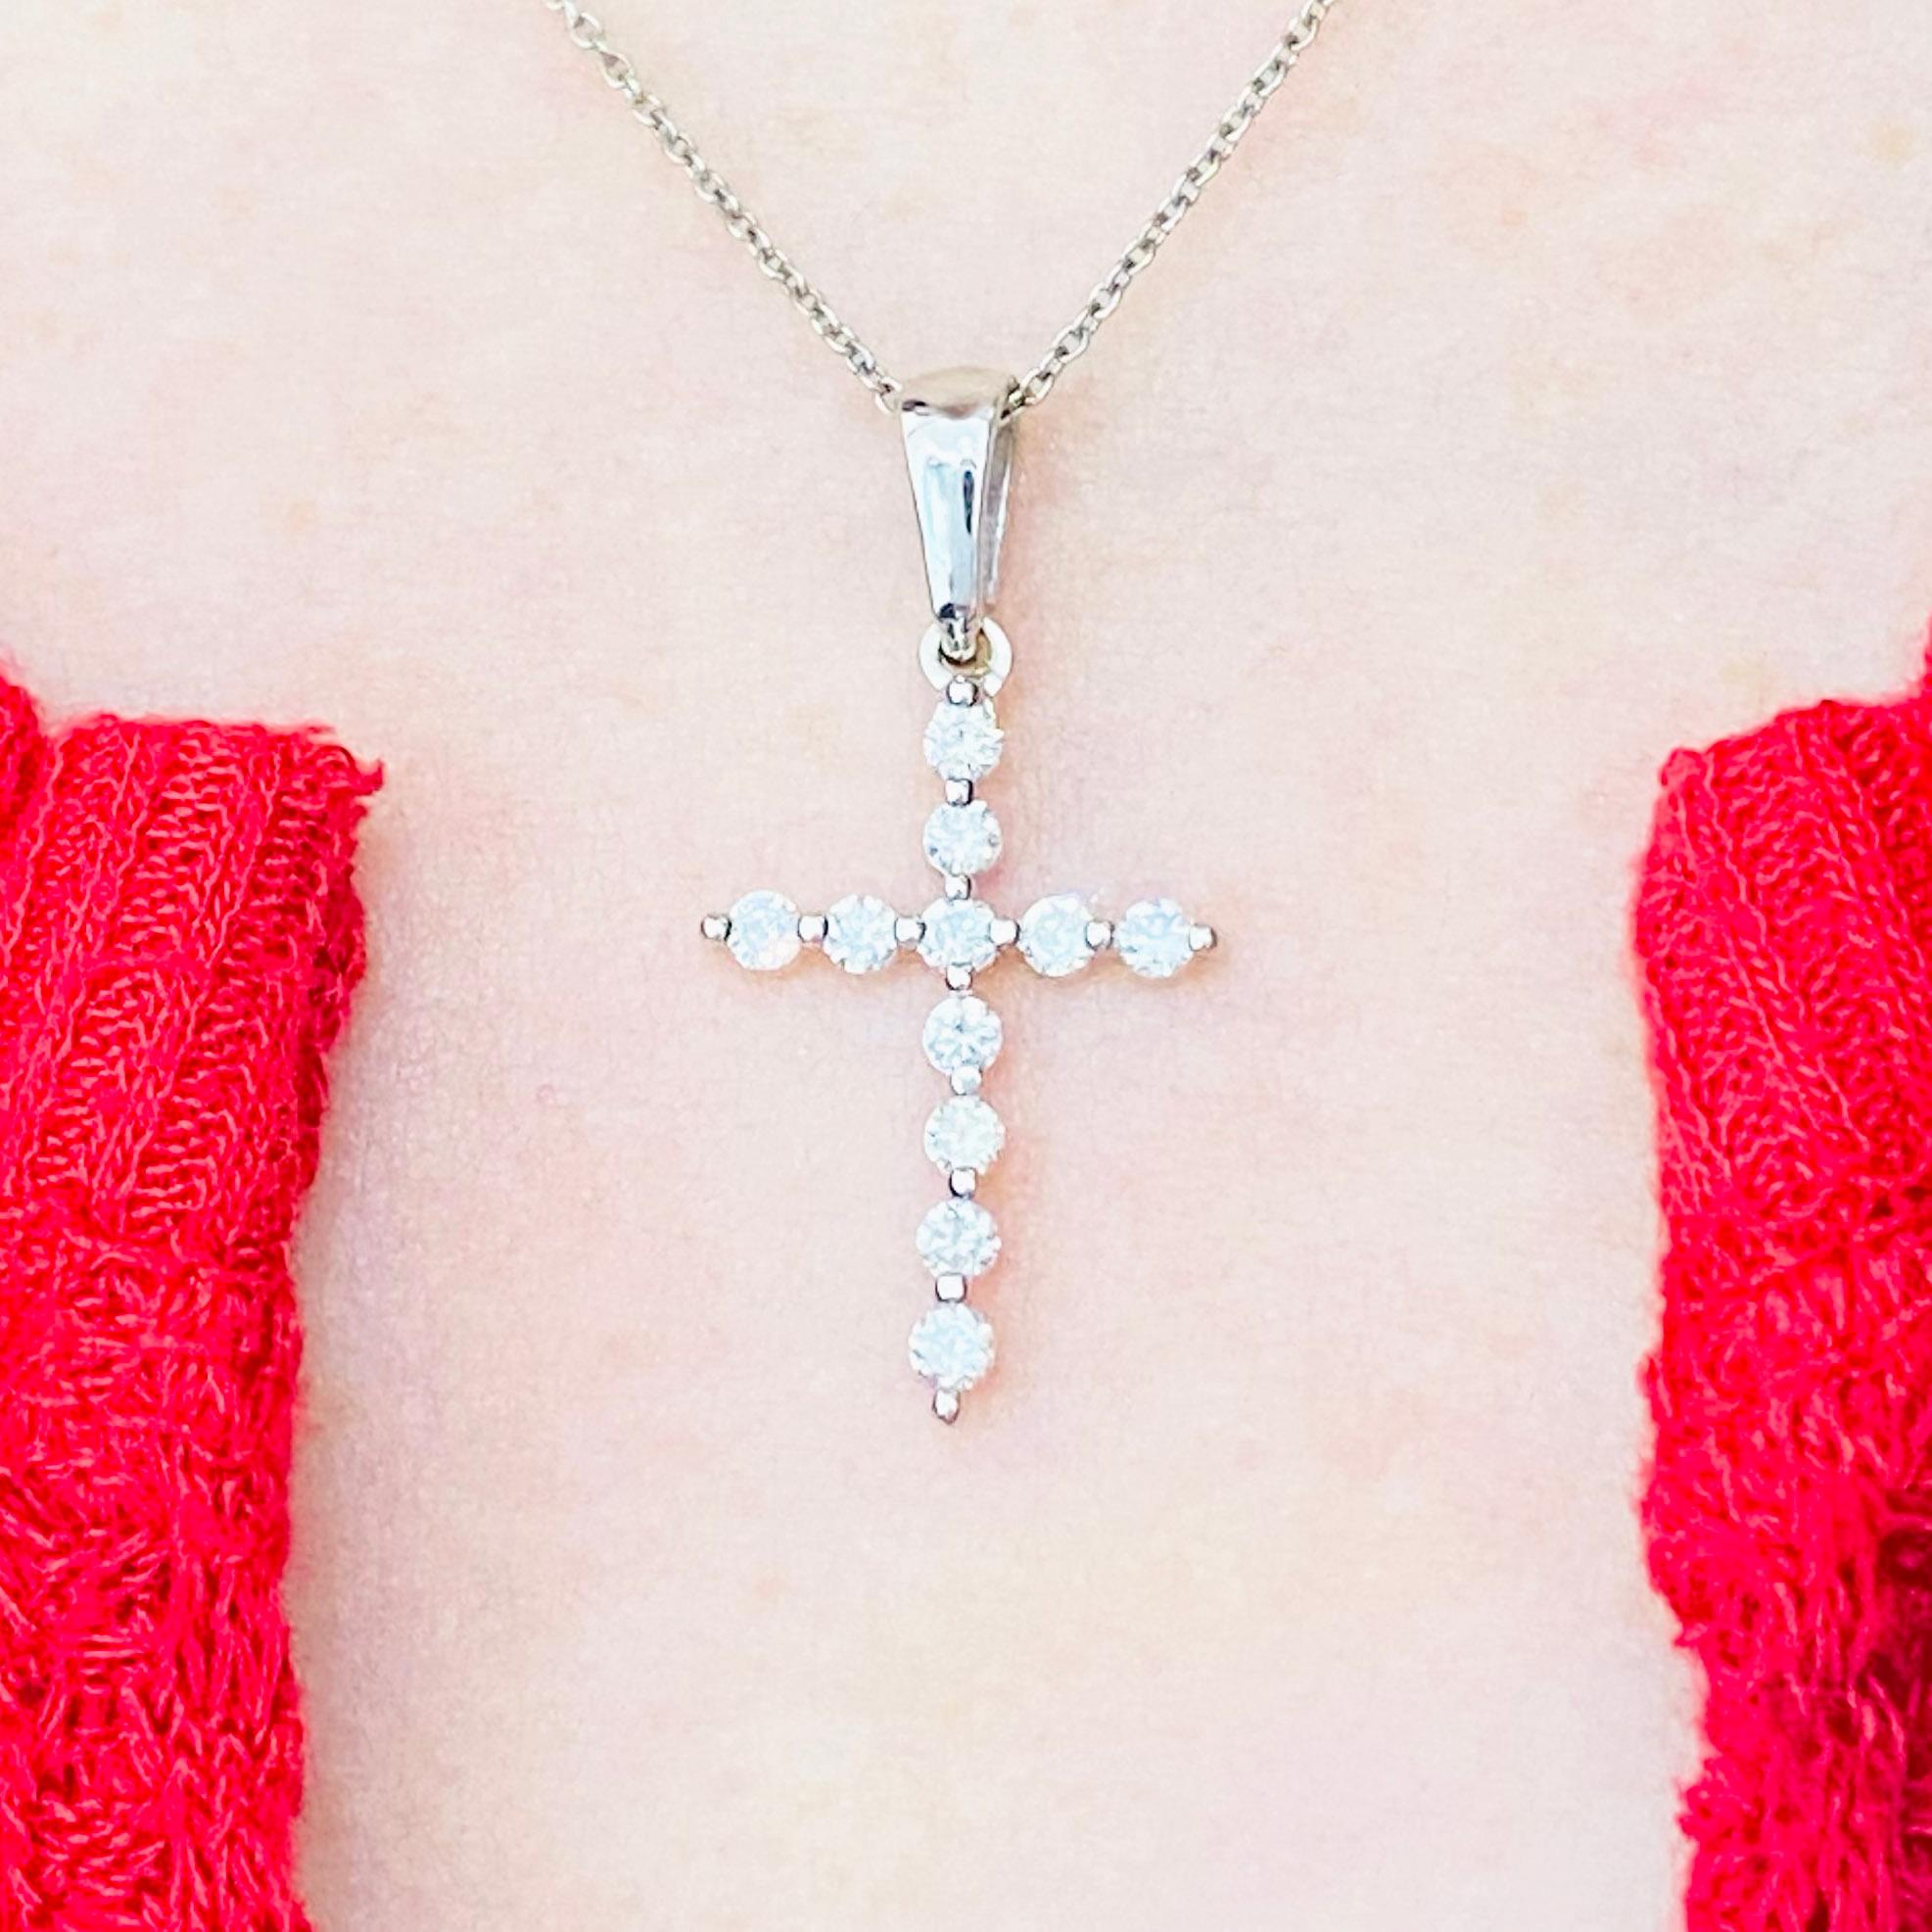 This gorgeous, delicate diamond cross pendant is a stunning and striking design. The cross pendant is made in 14 karat white gold with genuine, natural diamonds. This pendant is on an 16 inch cable chain that compliments the cross pendant perfectly.